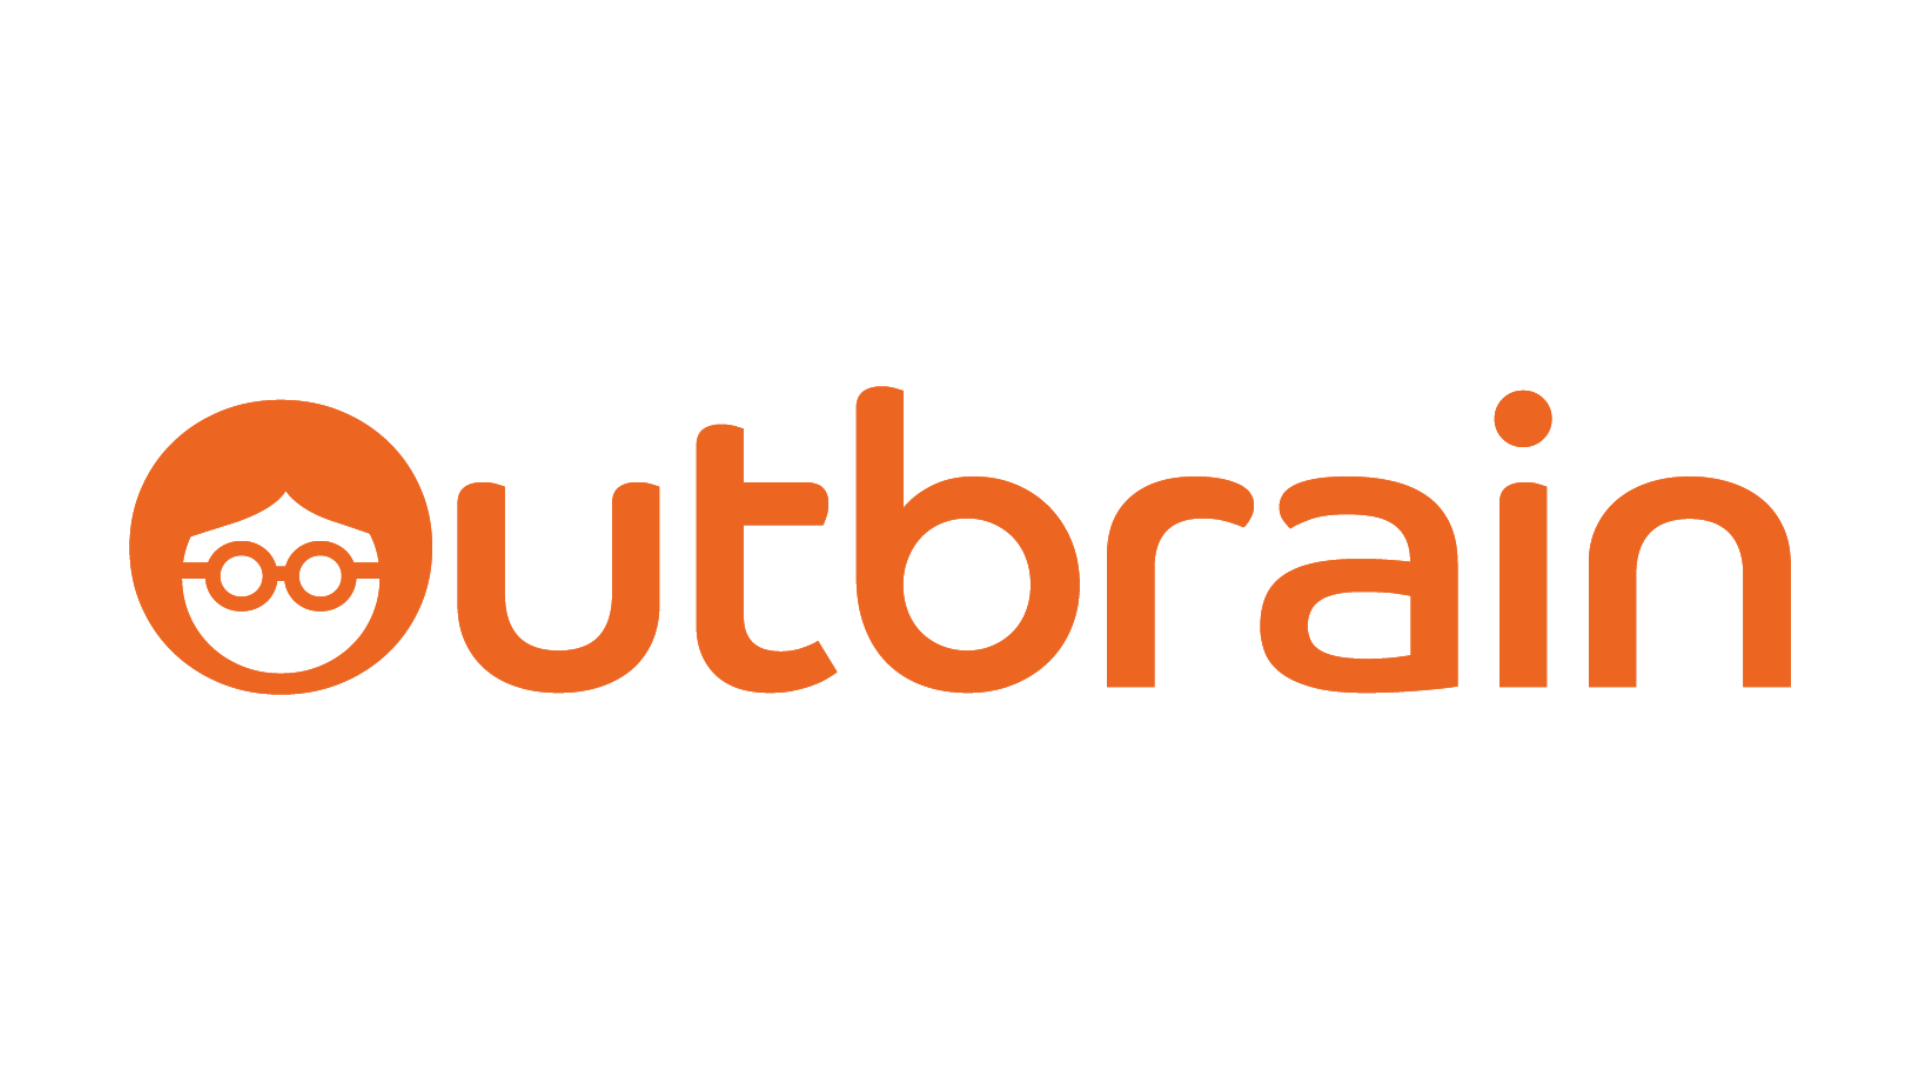 Native ads network Outbrain goes public today